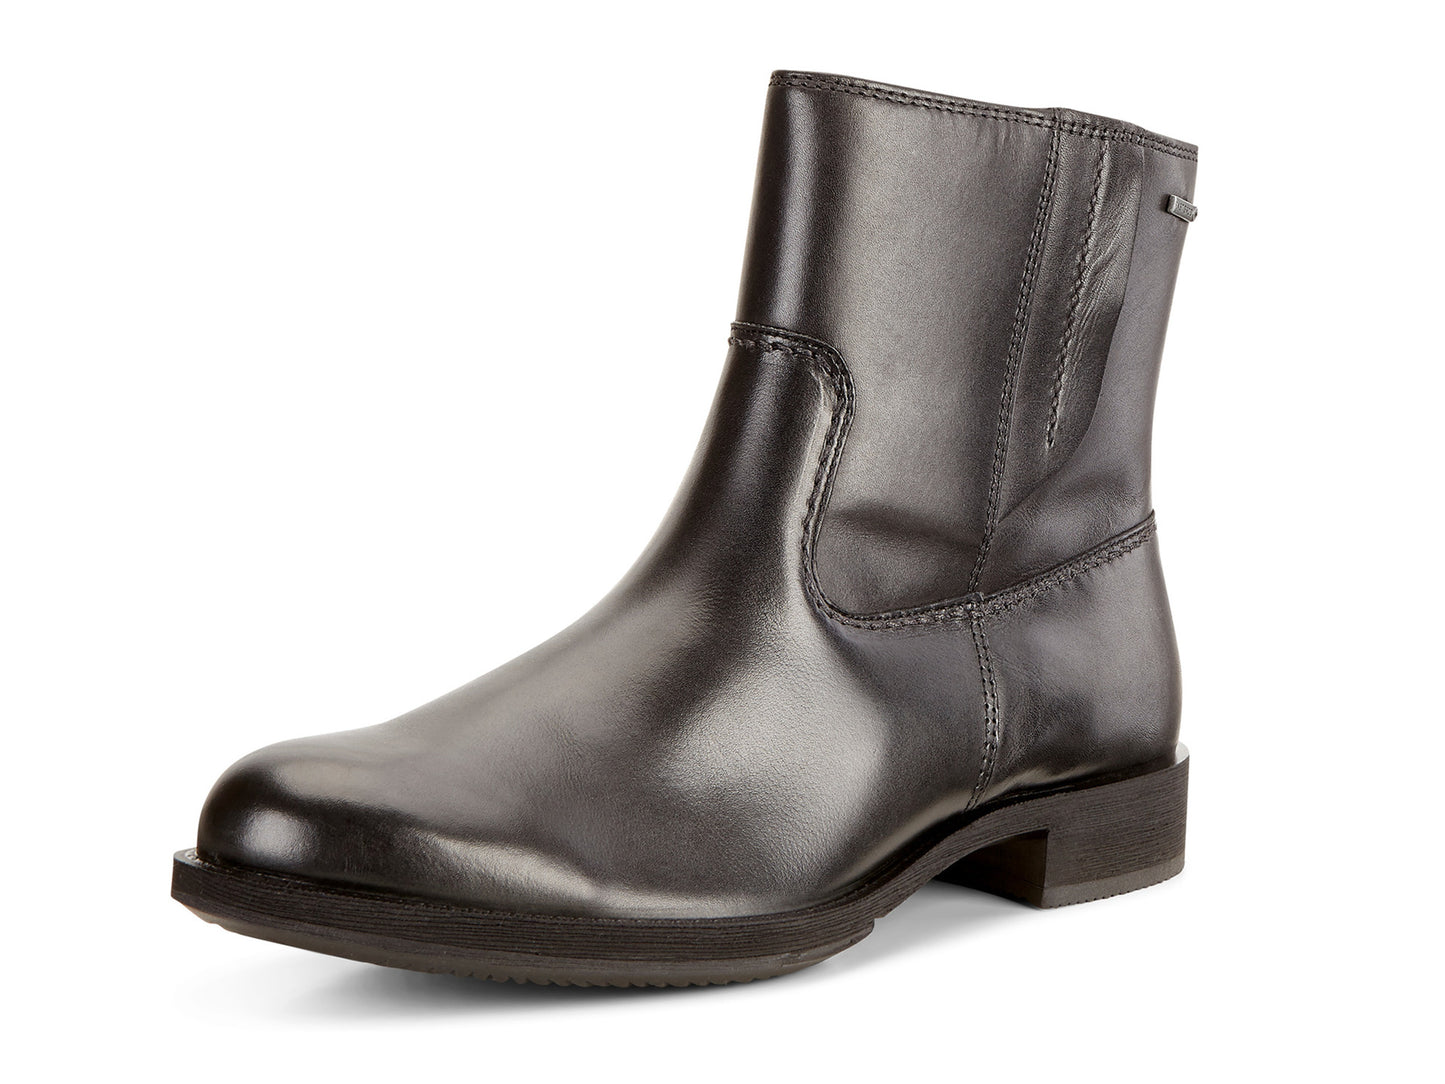 ECCO Womens Saunter Mid-Cut Ankle Boots